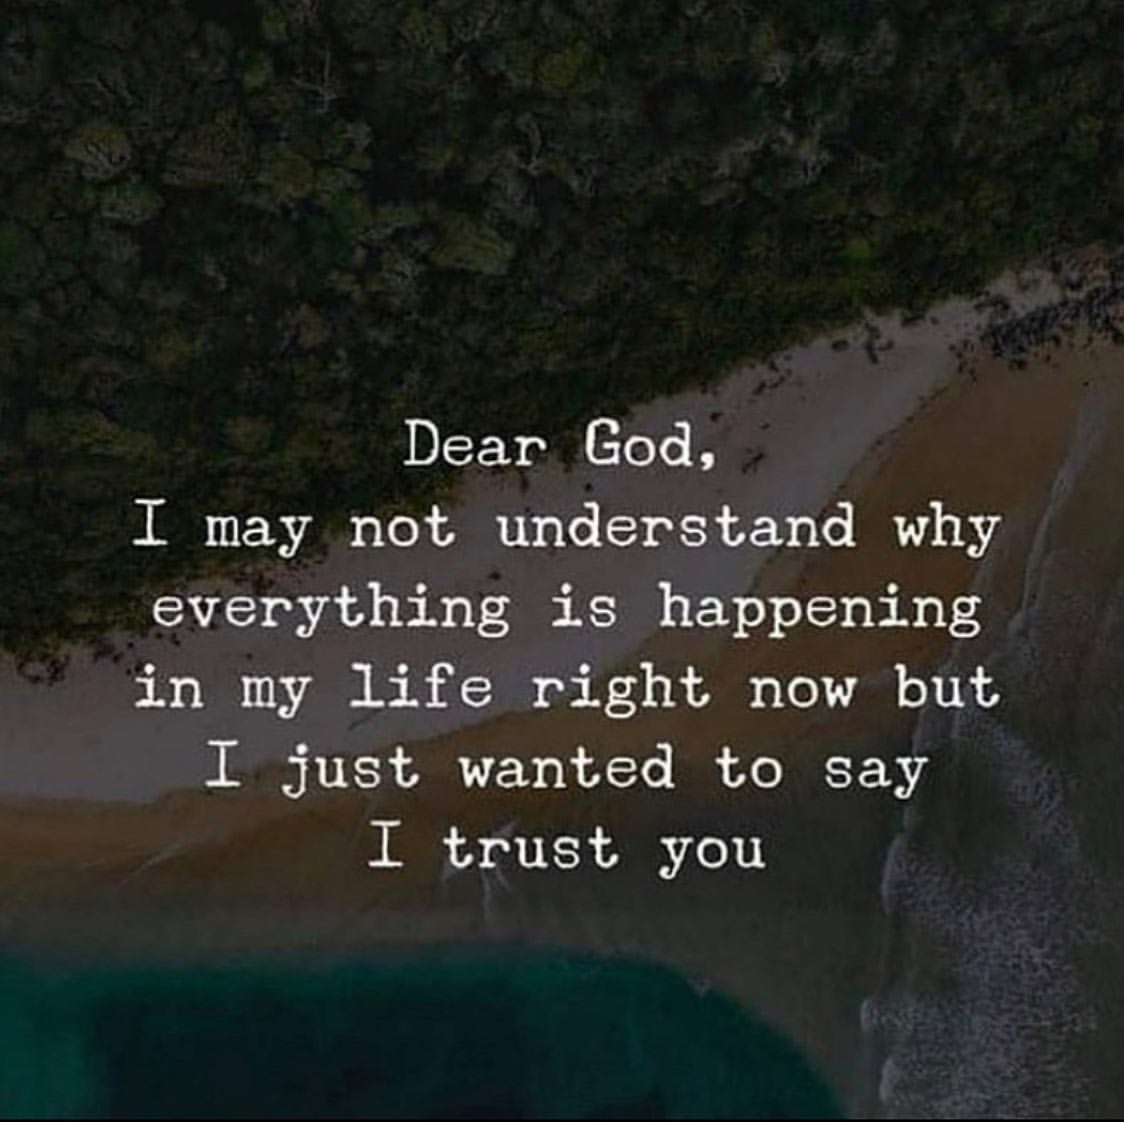 Dear God I may not understand why everything is happening in my life right now but I just want to say I trust you.